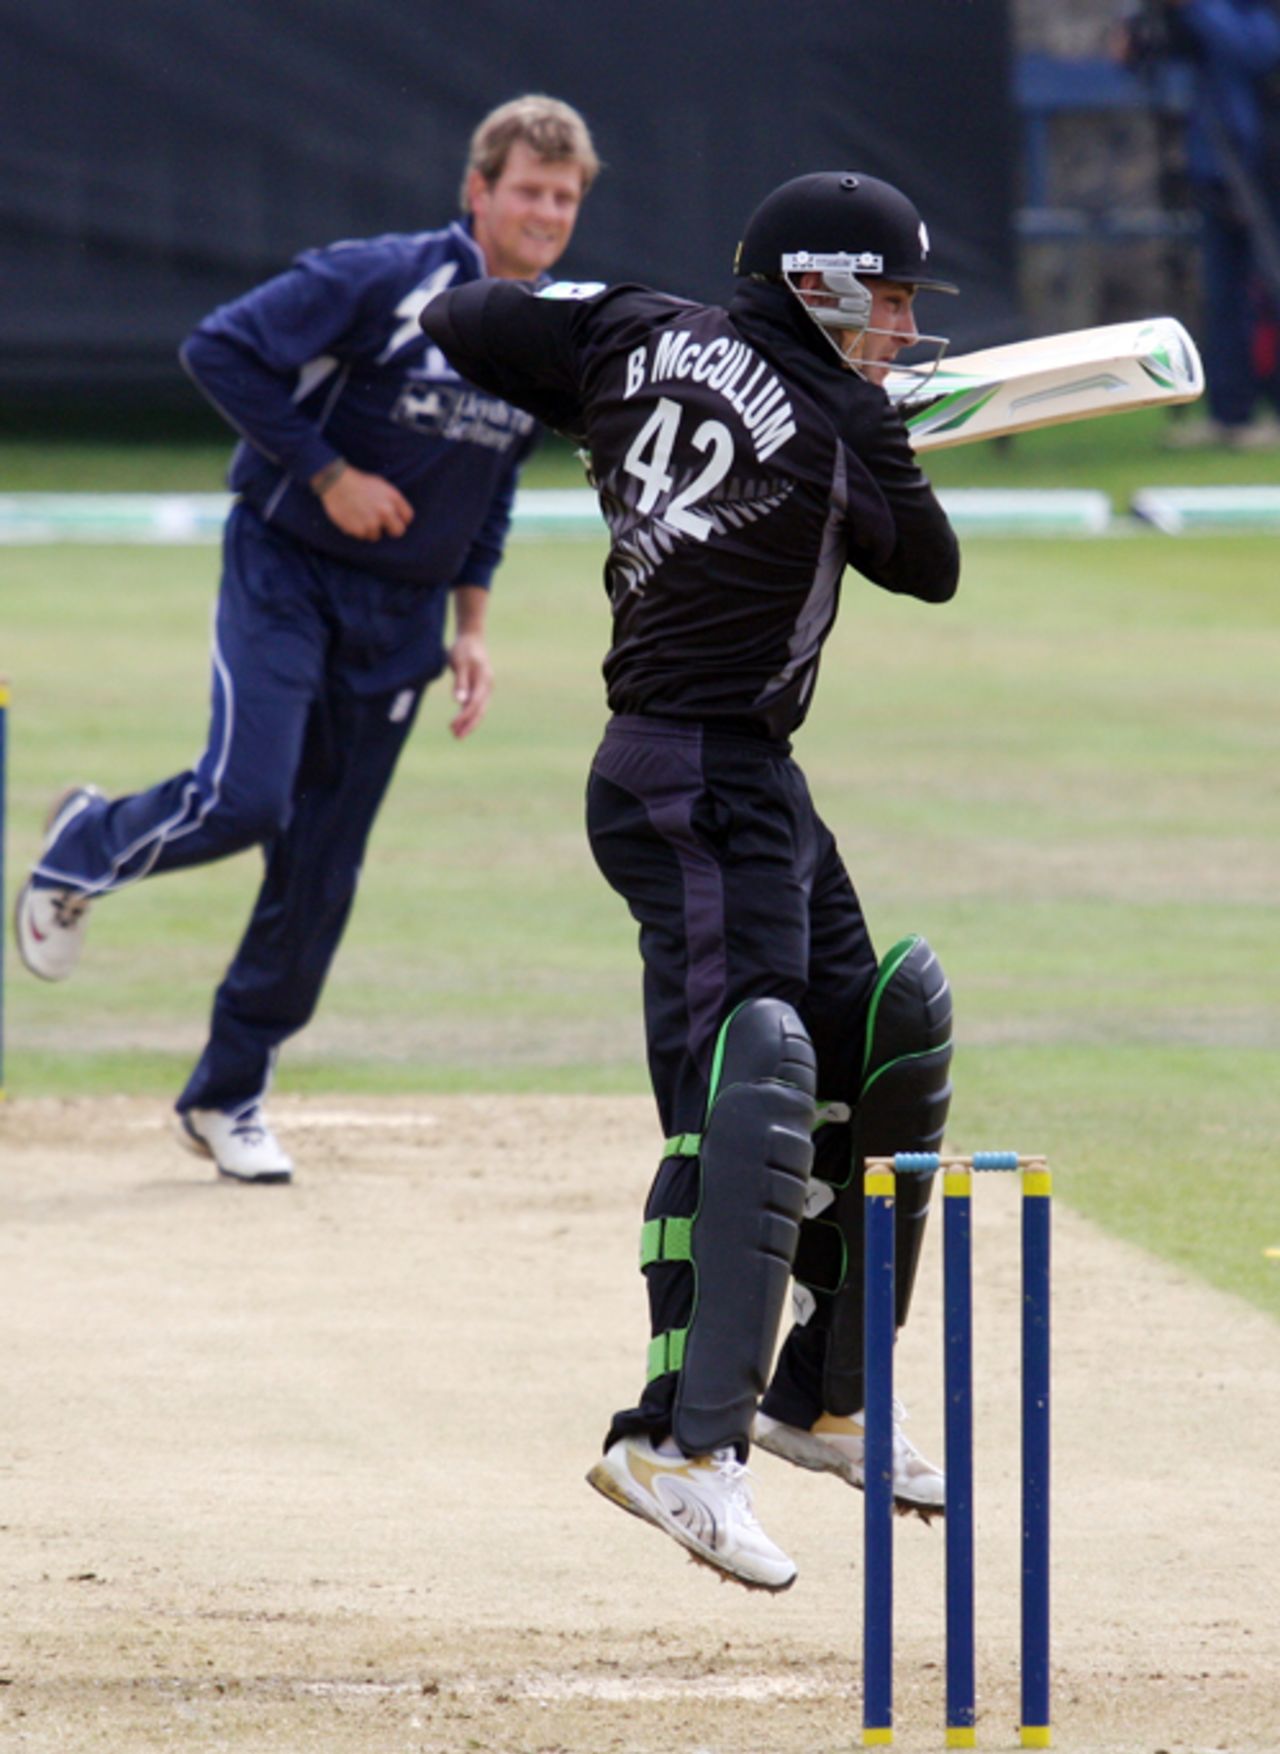 Brendon McCullum guides one through the off side, Scotland v New Zealand, Tri-series, Aberdeen, July 3, 2008